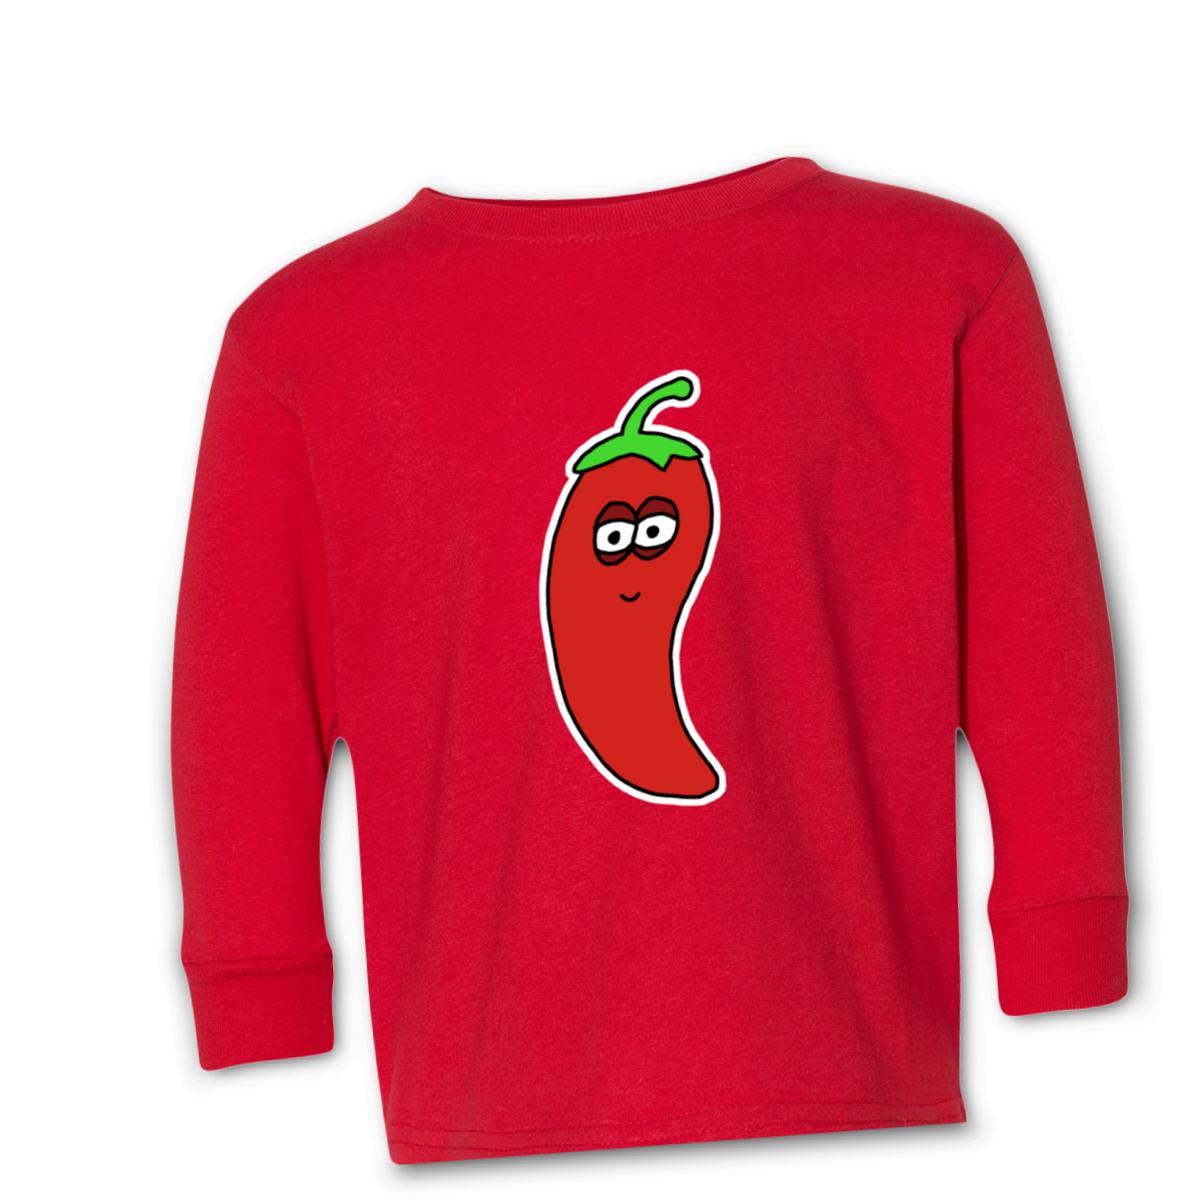 Chili Pepper Kid's Long Sleeve Tee Small red